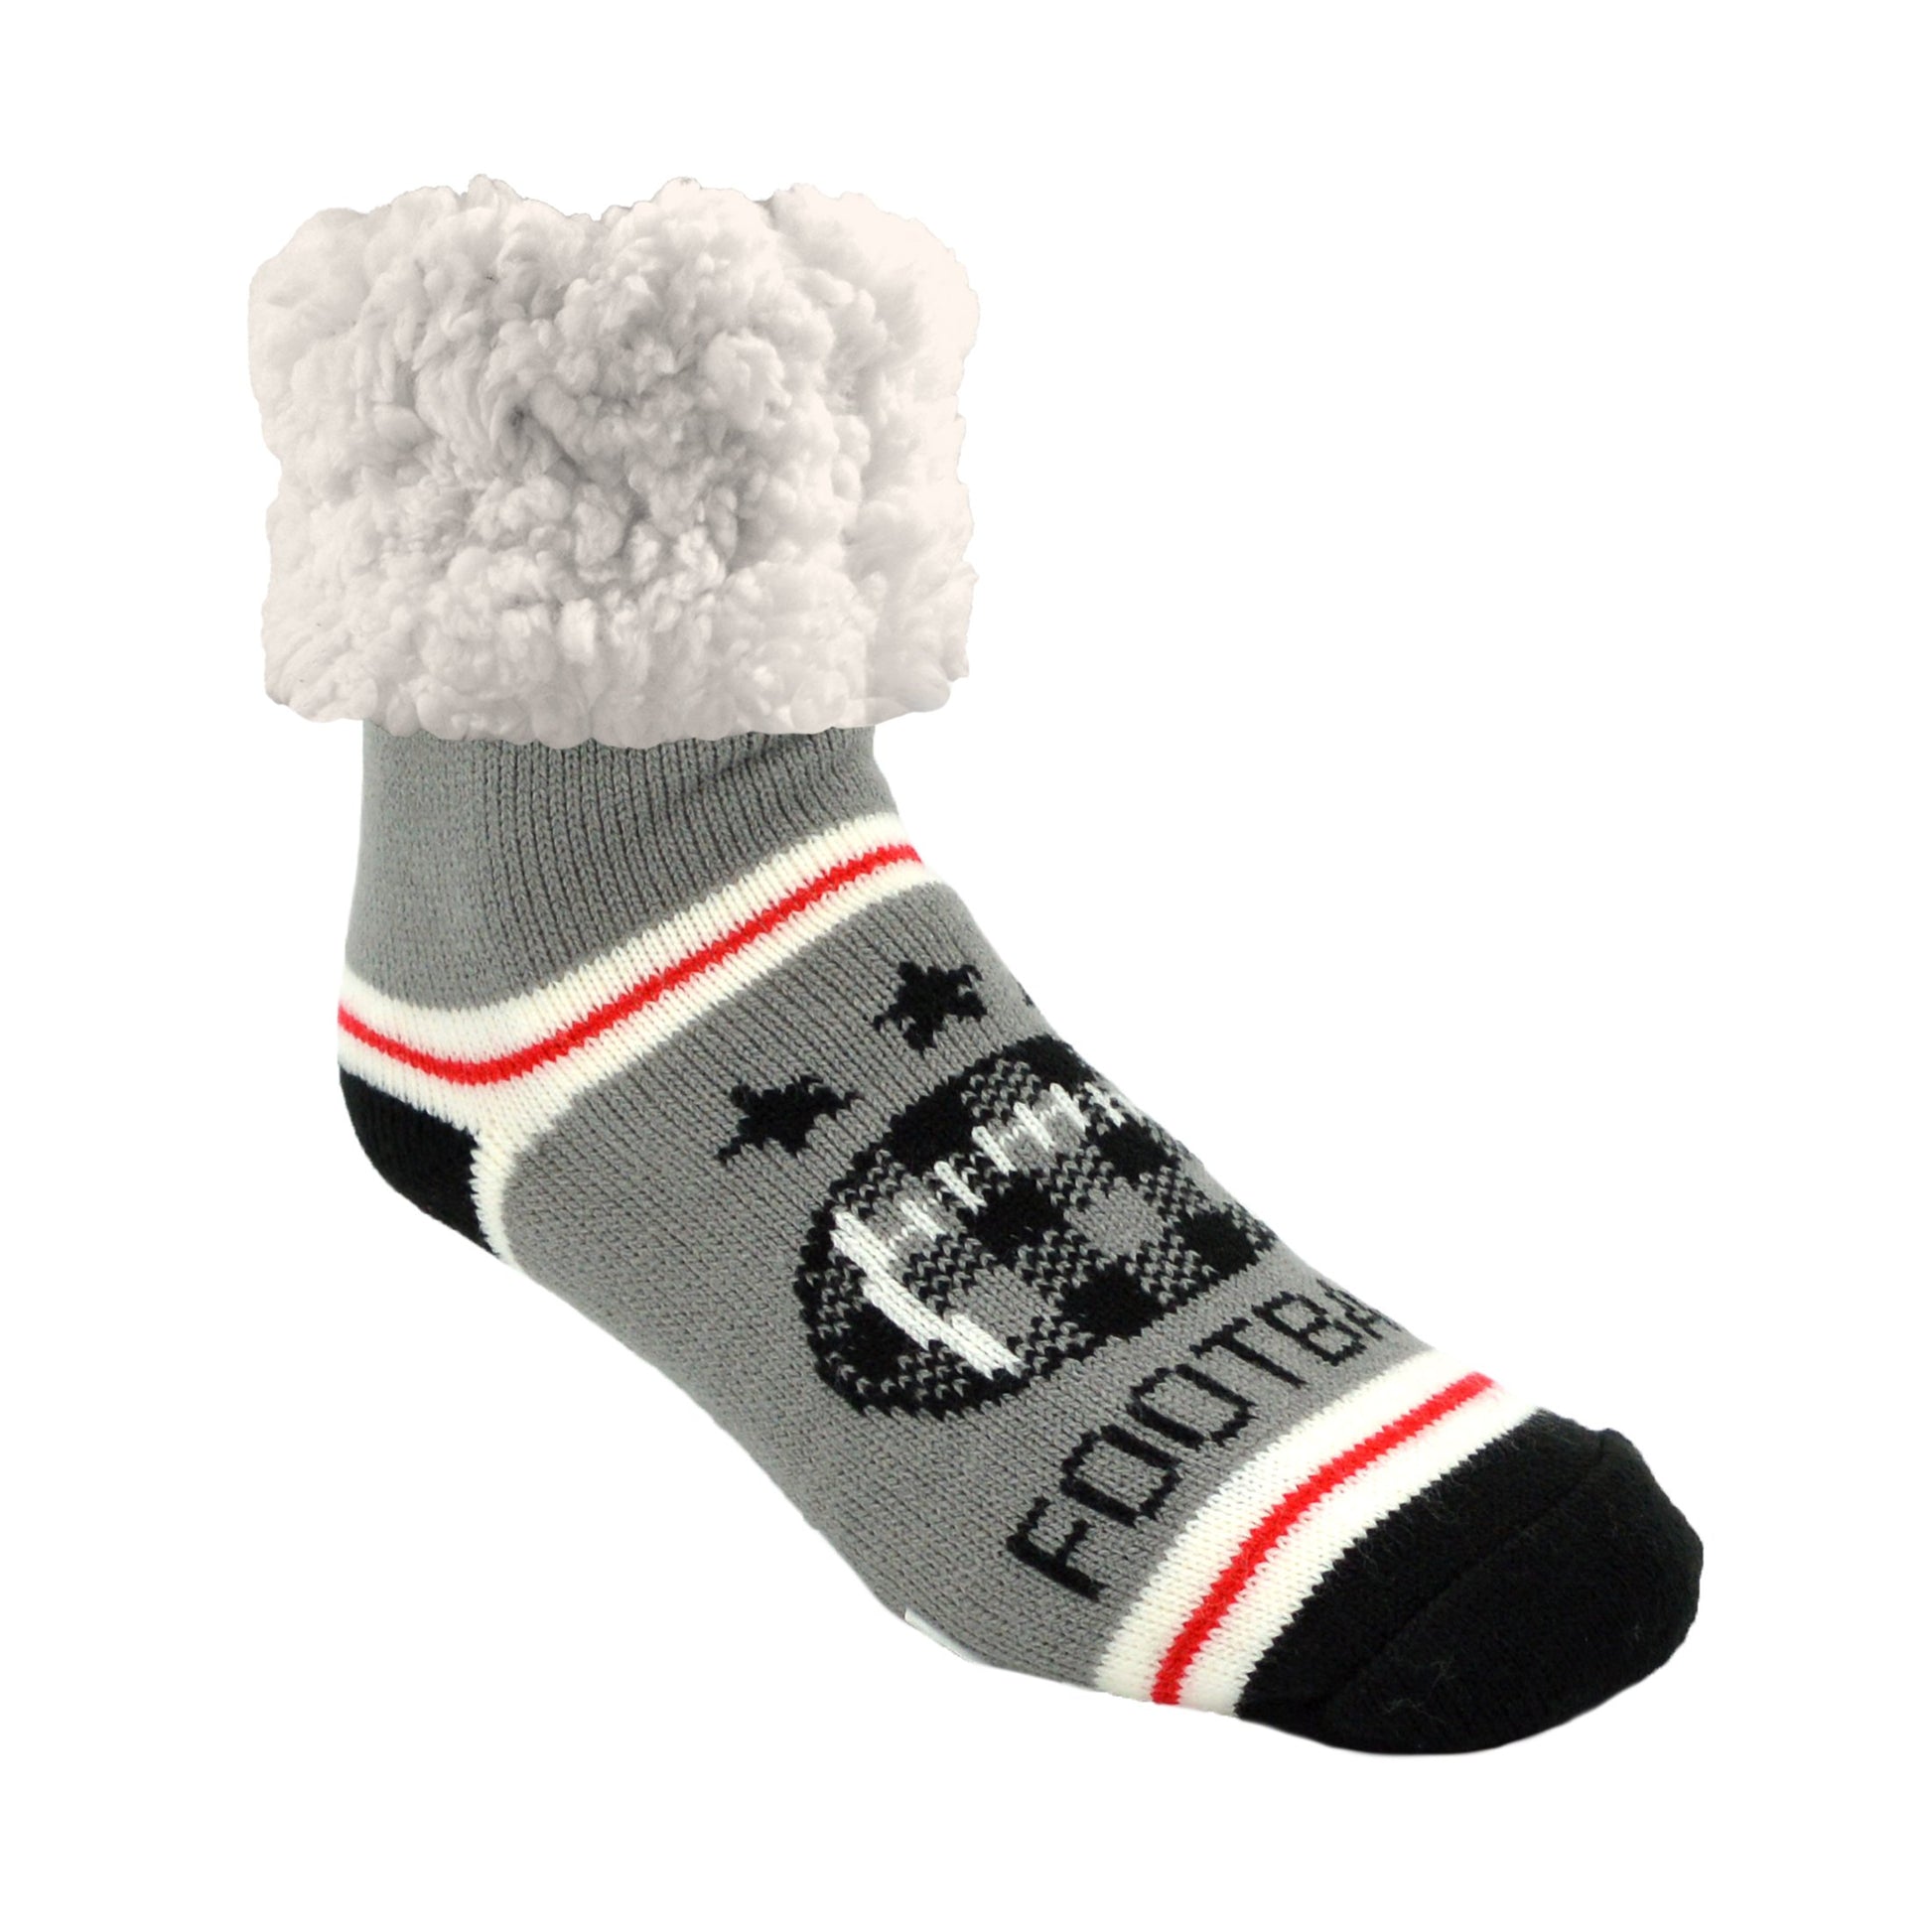 New w/Tags Gray & White Slipper Socks w/Grippers from A New Day